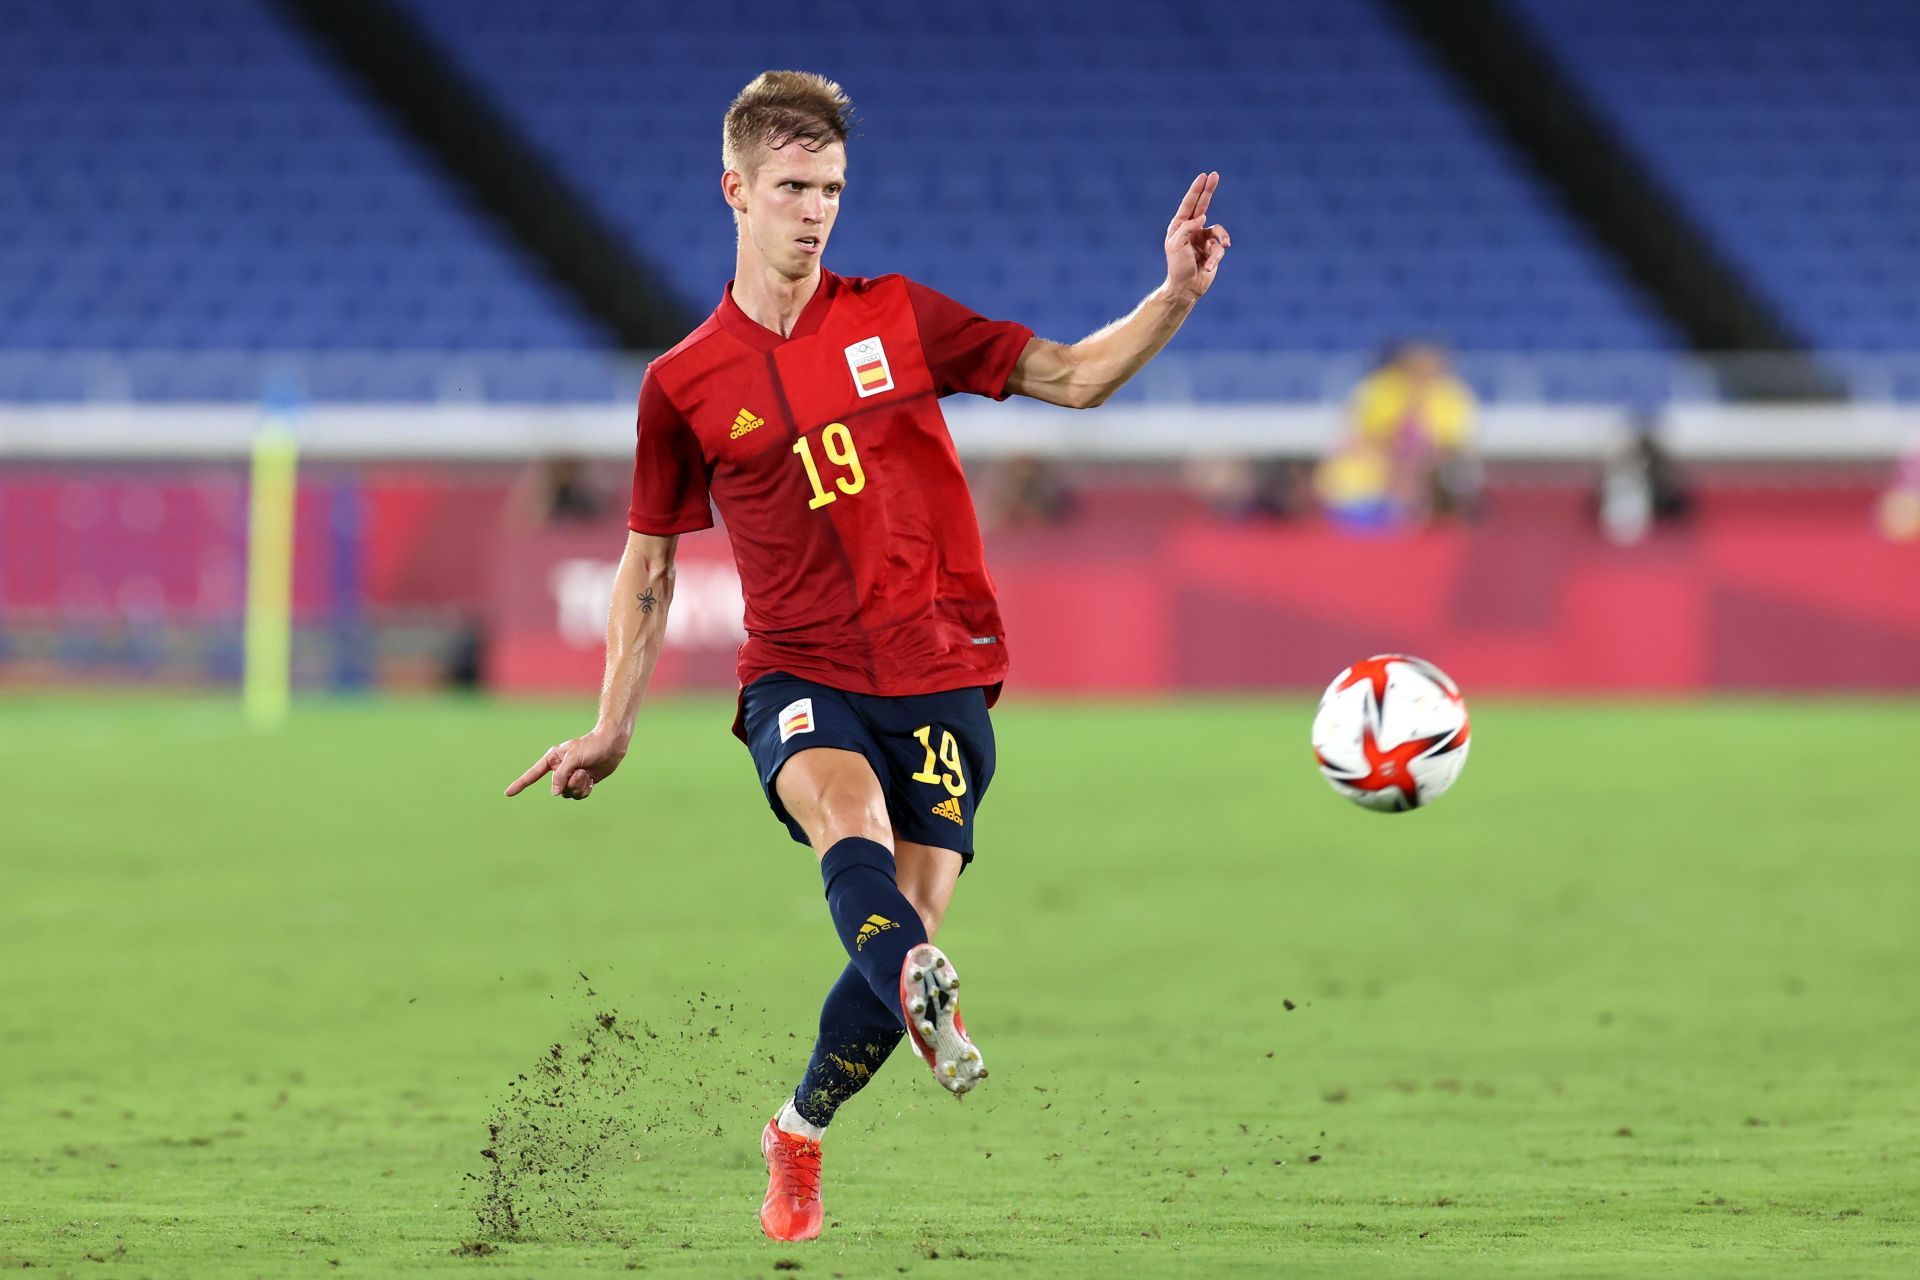 Barcelona have ended their pursuit of Dani Olmo.